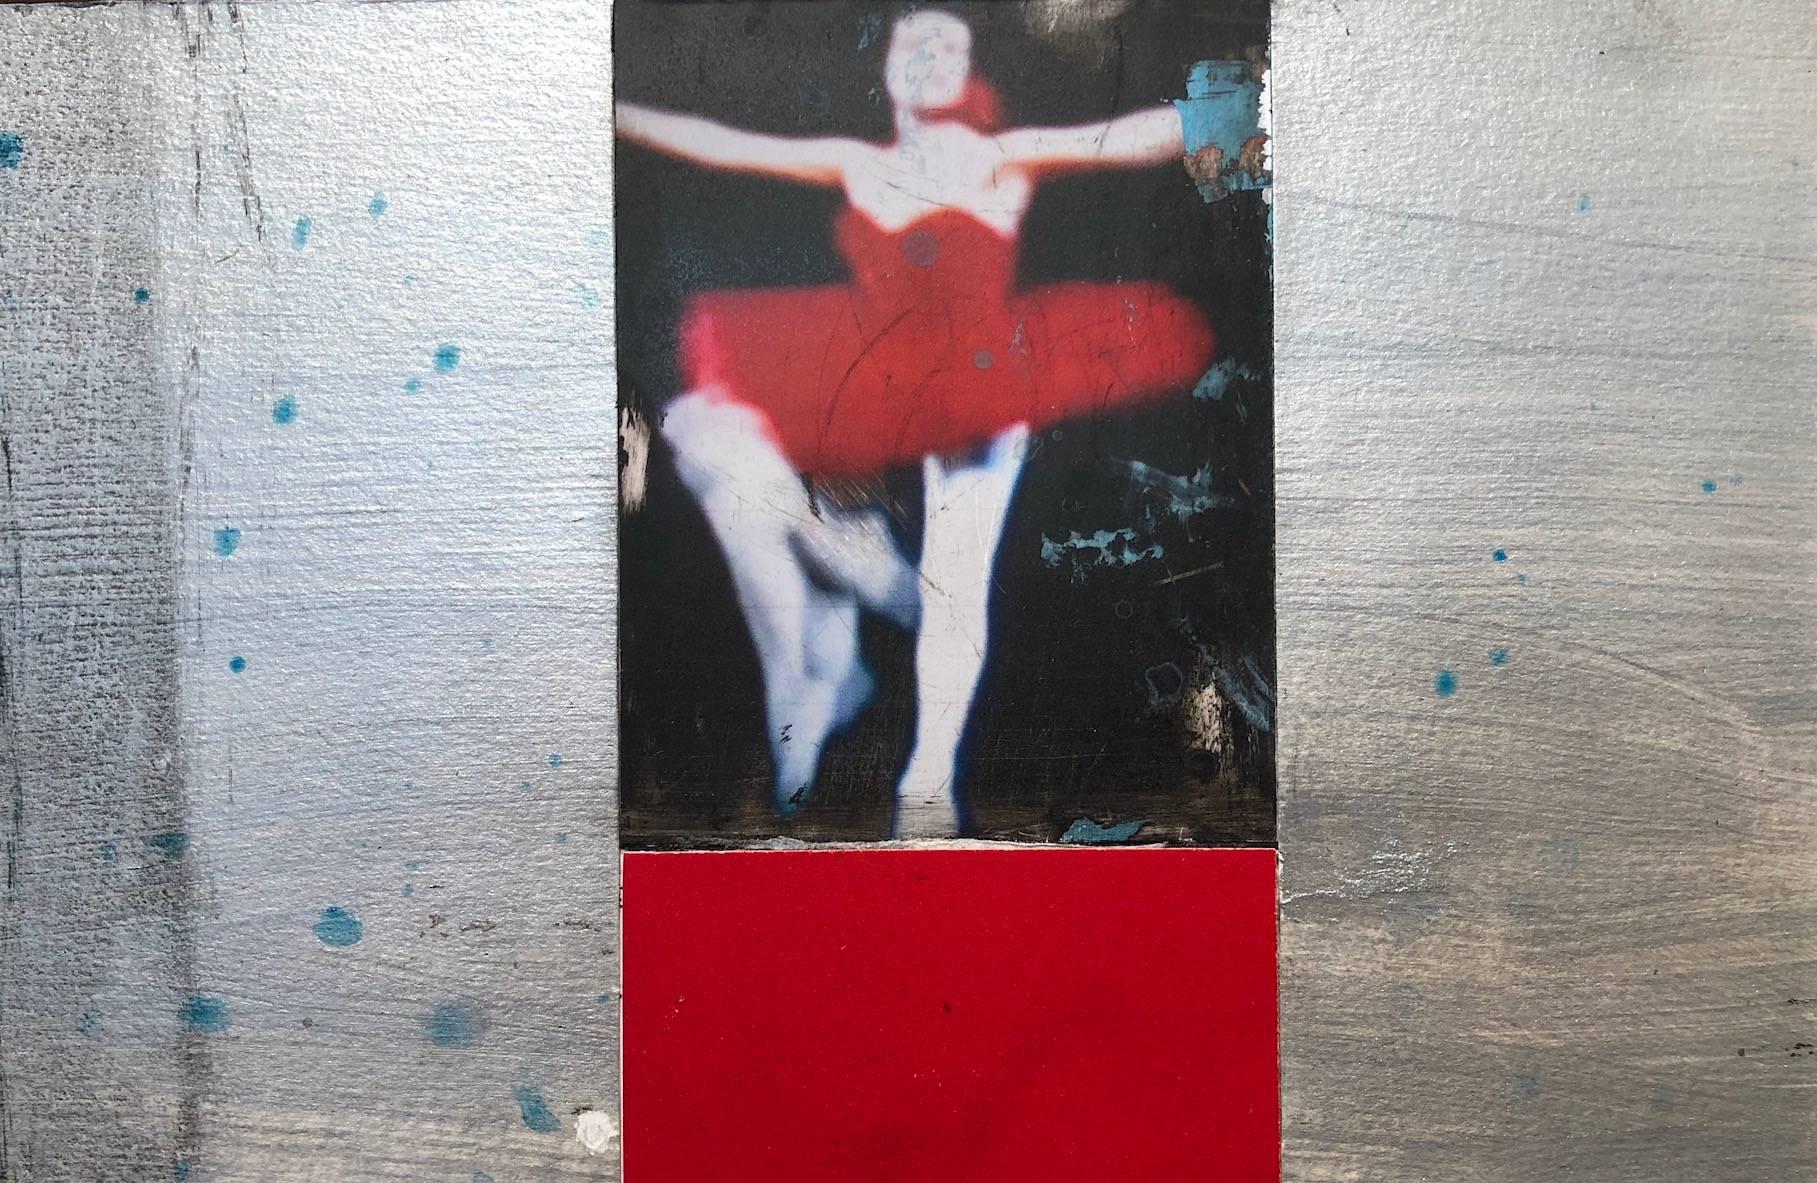 BAllet dancer in red featured in 'Double-Ticket Silverscreen' from multidisciplinary visual artist Kim Frohsin, who created the series, 'Dancers and Athletes', from a variety of media—acrylic paint, glazes, ink, collage, pencils, and dry